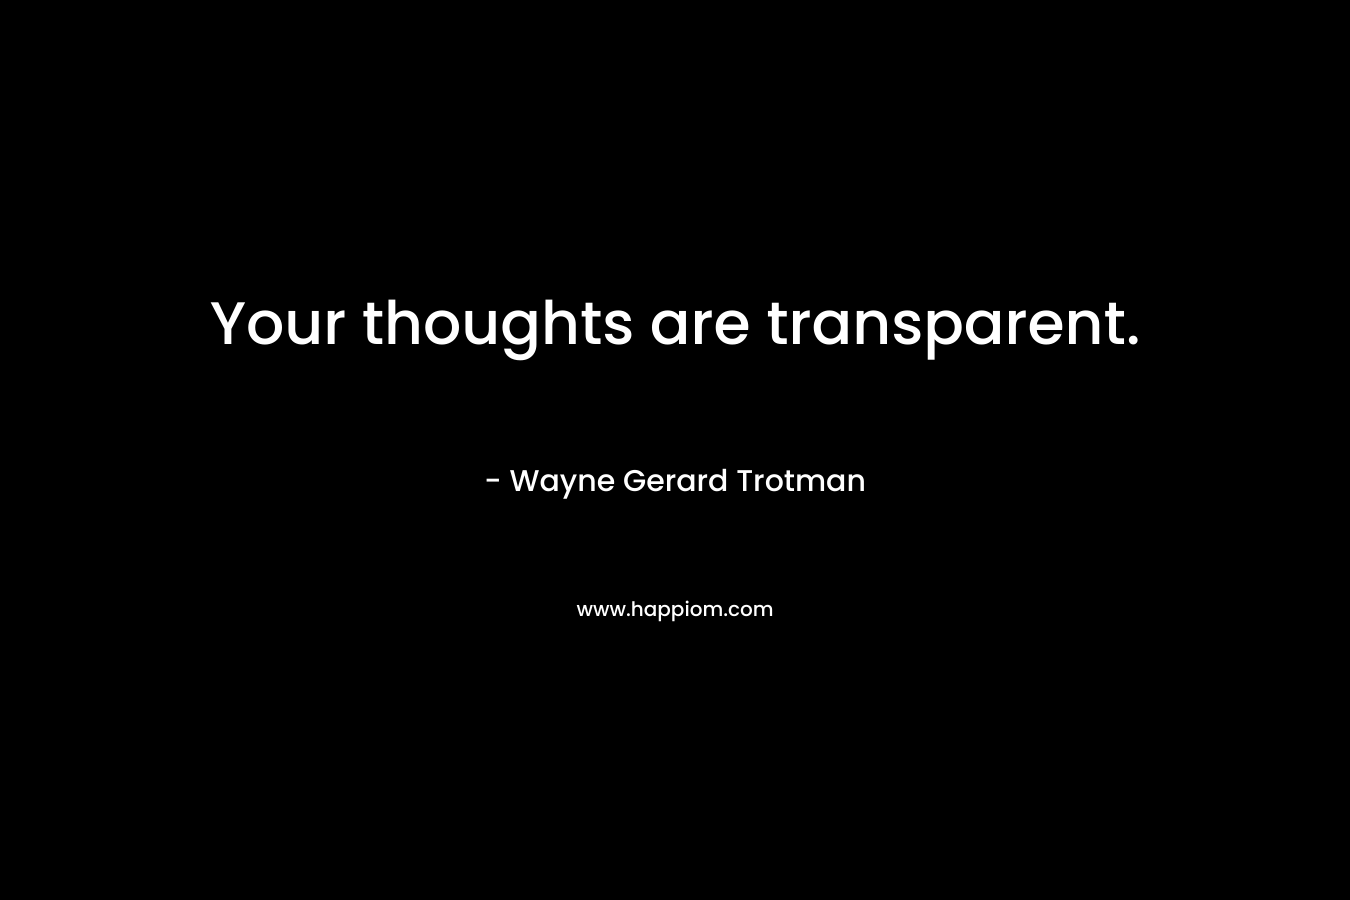 Your thoughts are transparent.